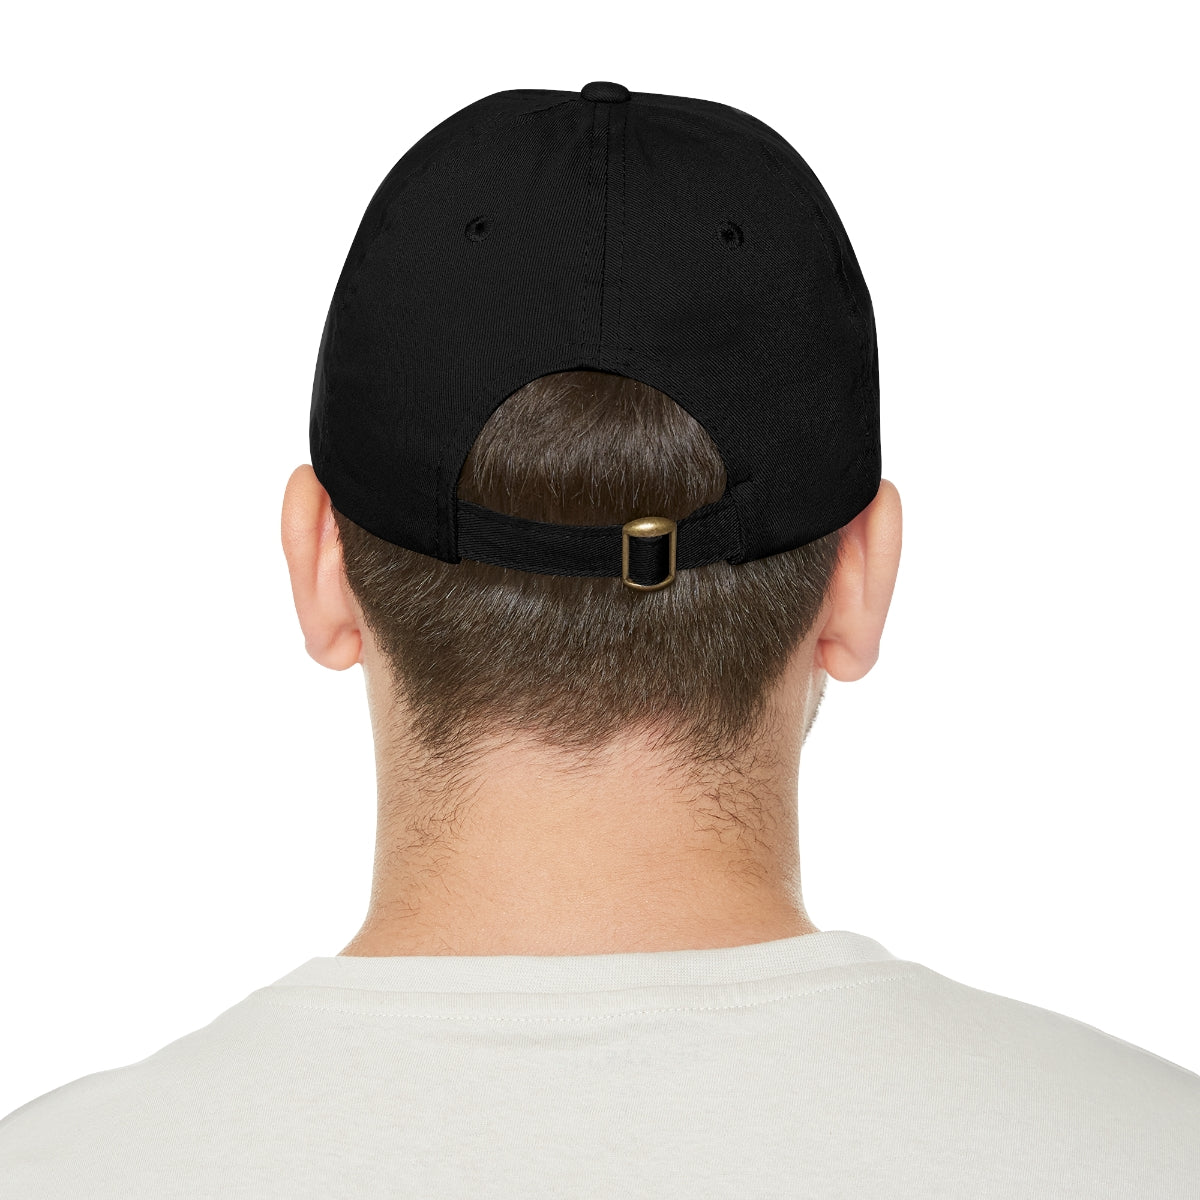 SBT 12 v1 Hat with Leather Patch (Gold)